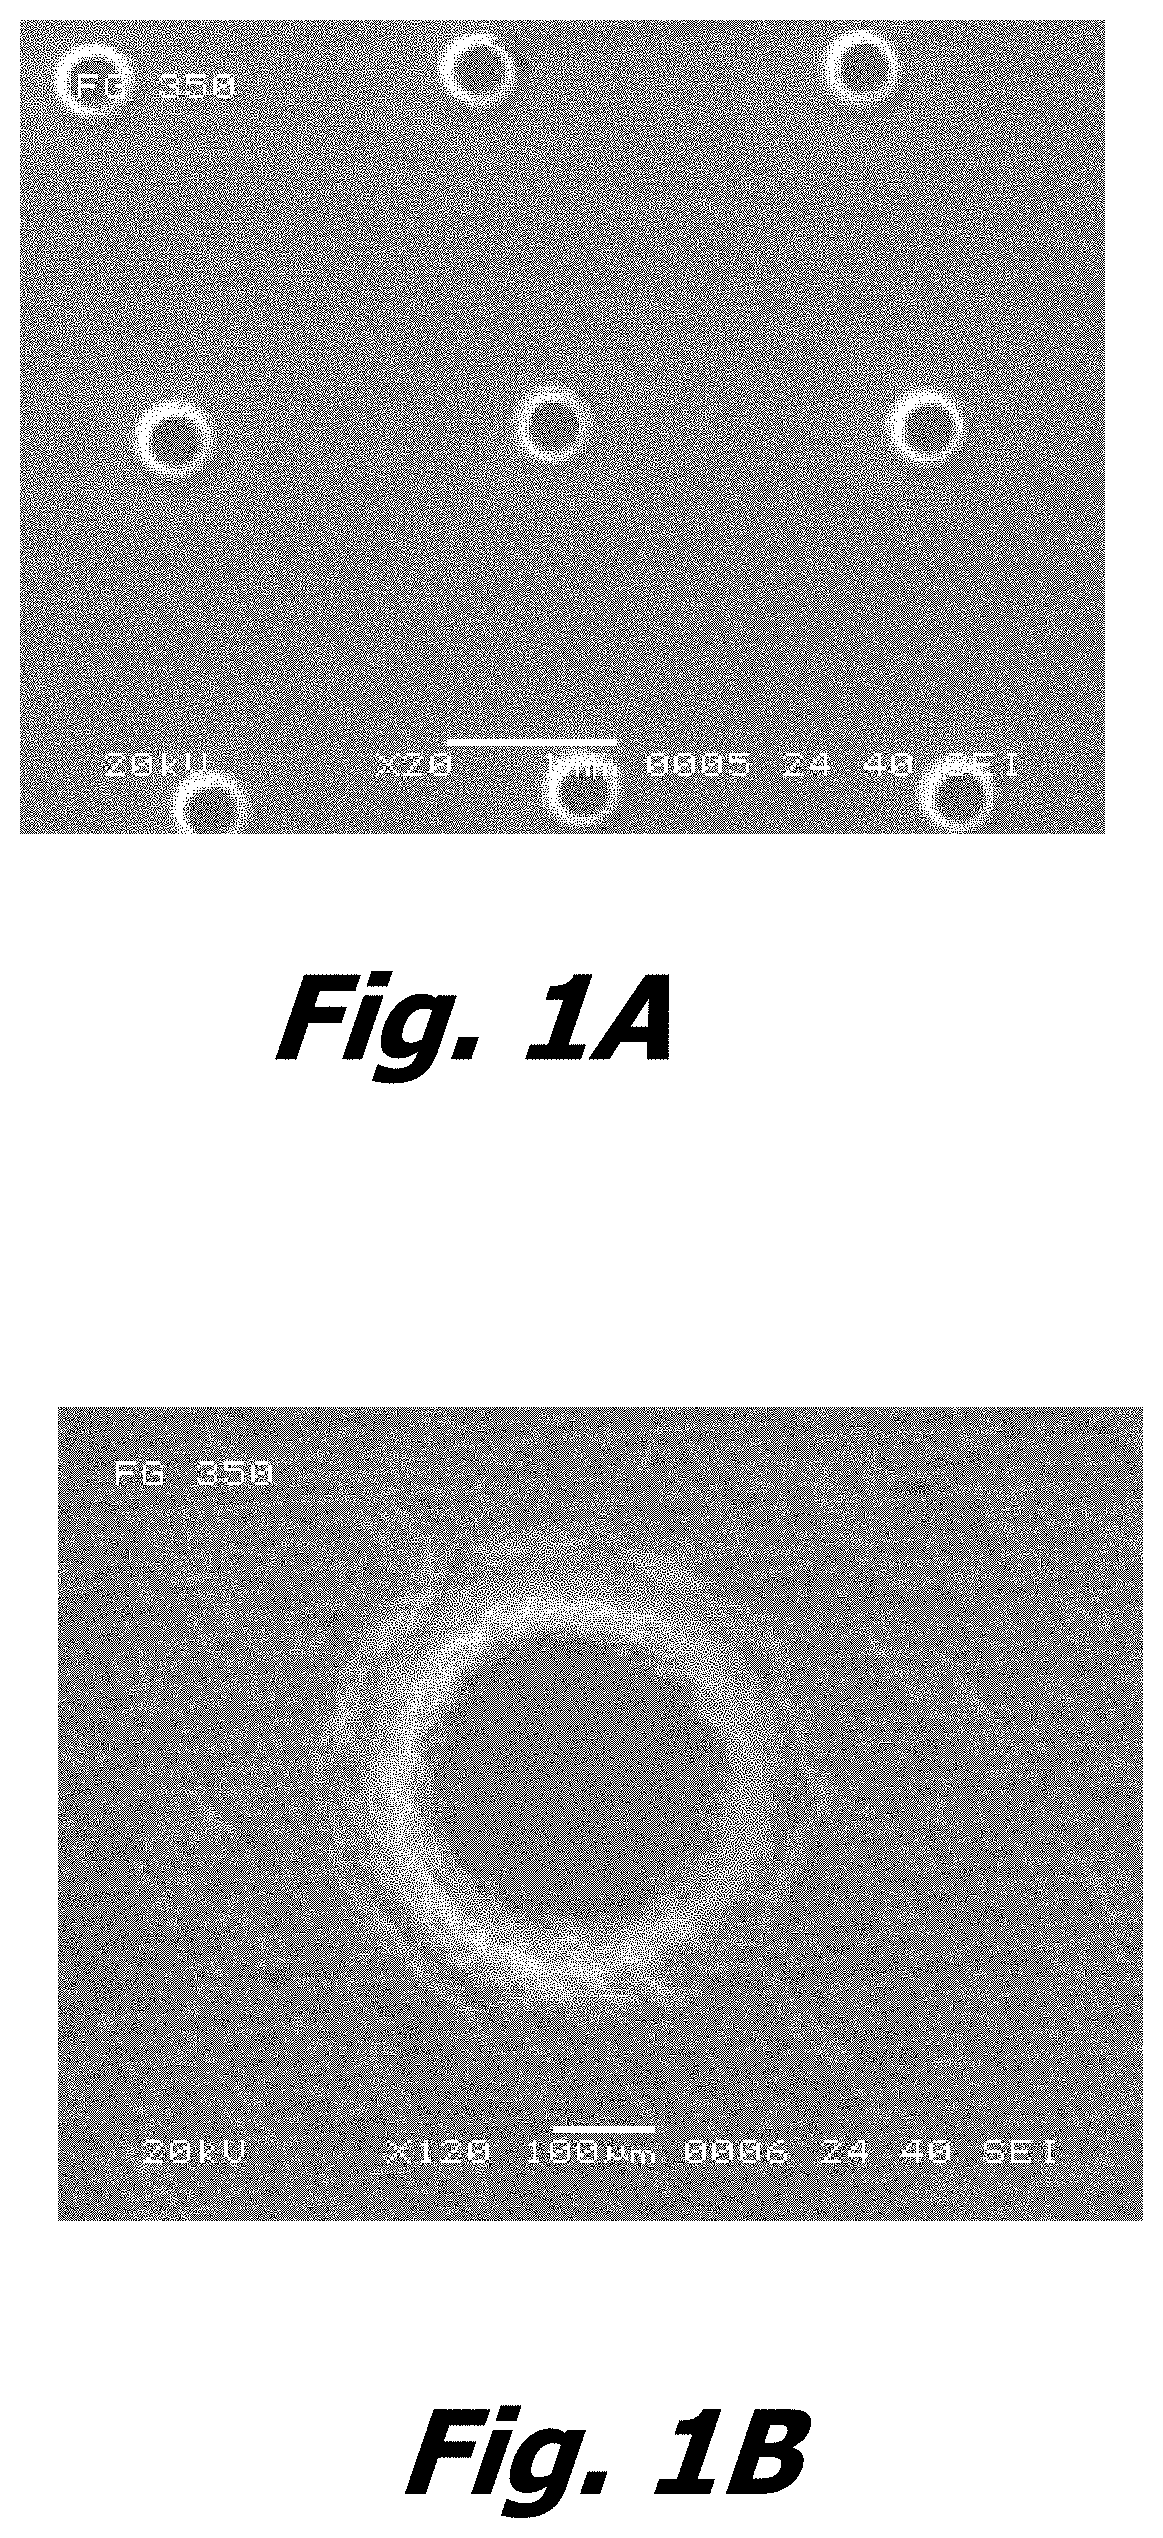 Inert gas-assisted laser machining of ceramic-containing articles